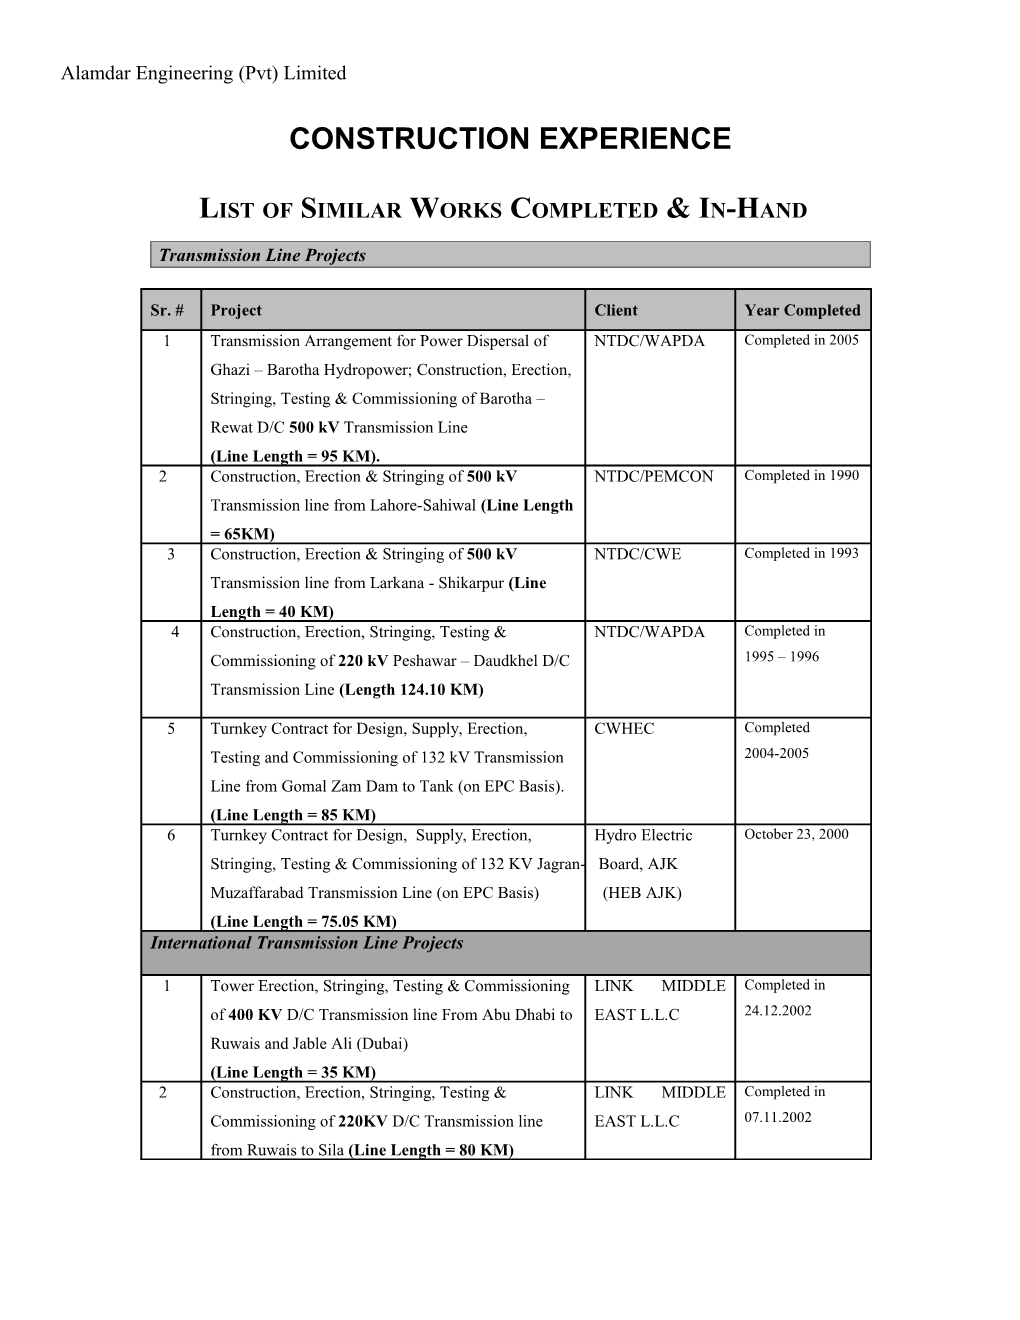 List of Similar Works Completed & In-Hand